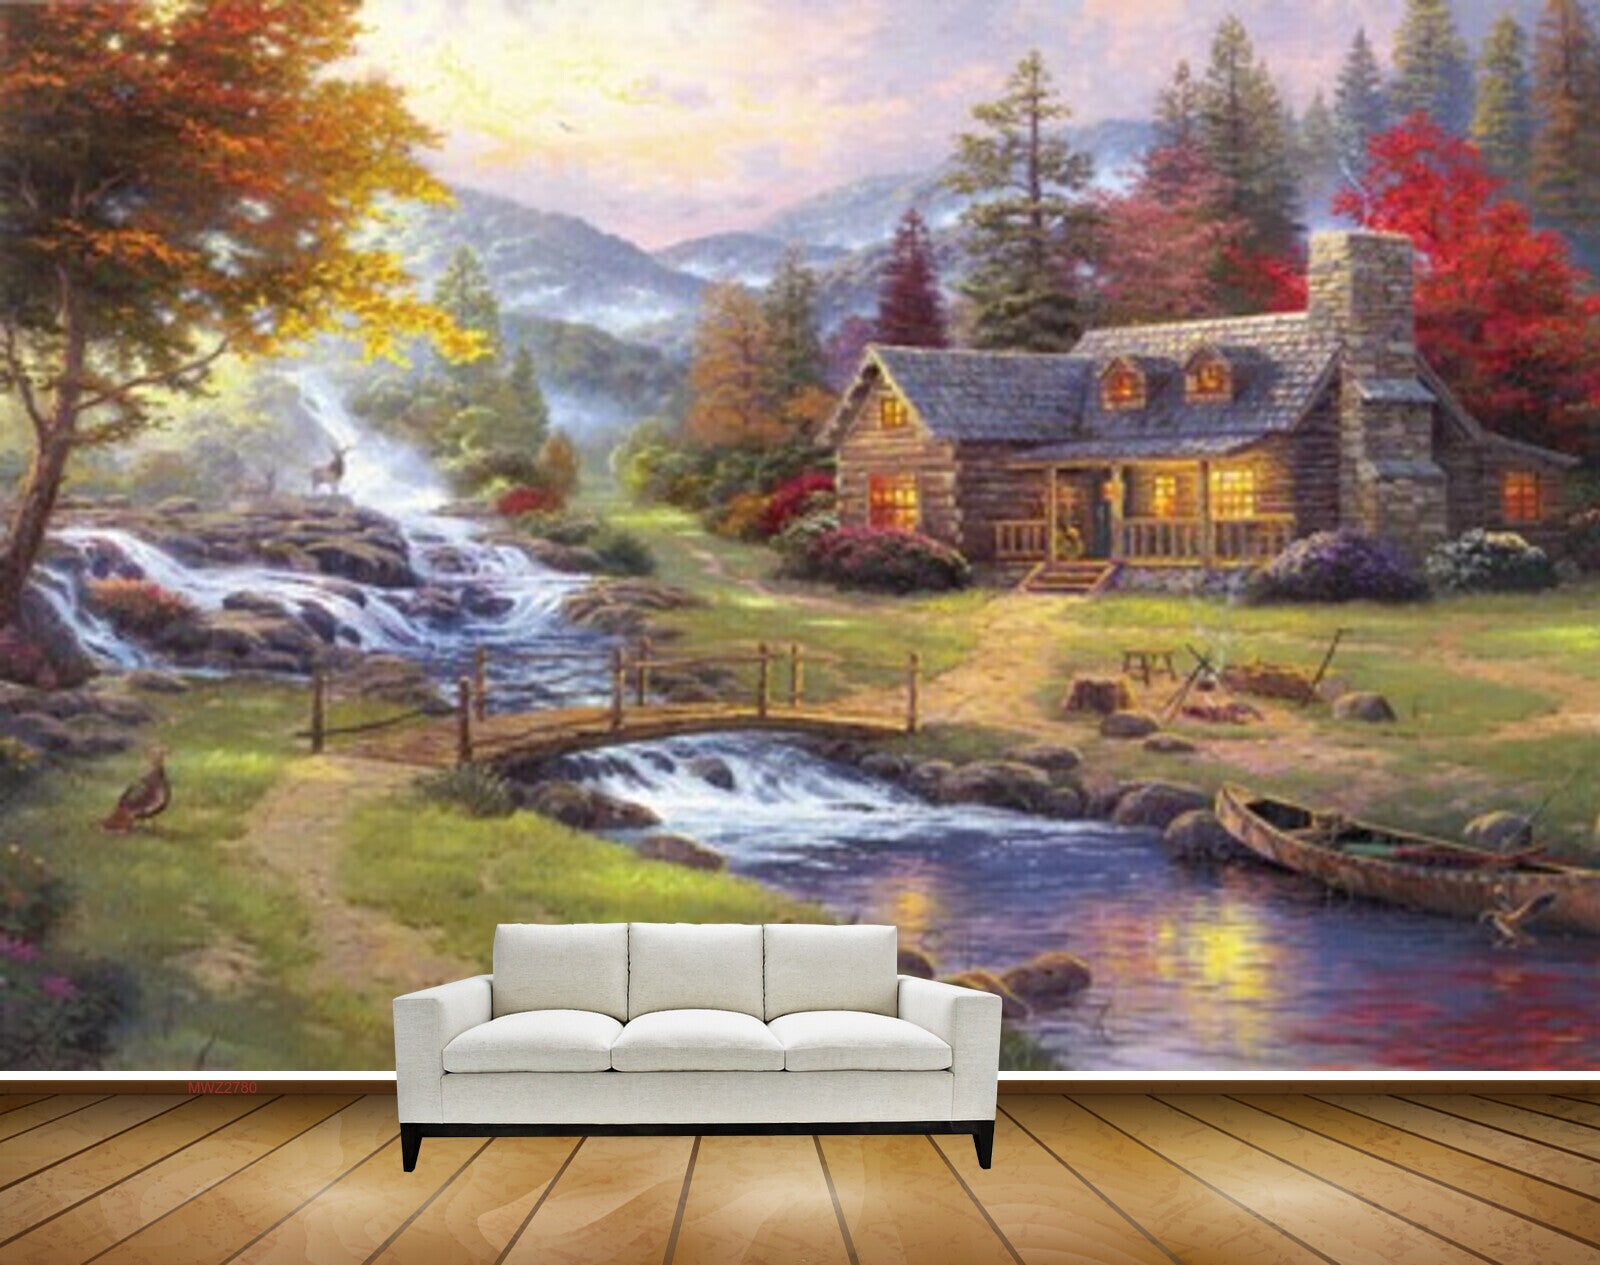 Avikalp MWZ2780 Waterfalls Mountains Houses River Pond Water Houses Trees Red Flowers Bridge Grass Boat Birds Painting HD Wallpaper